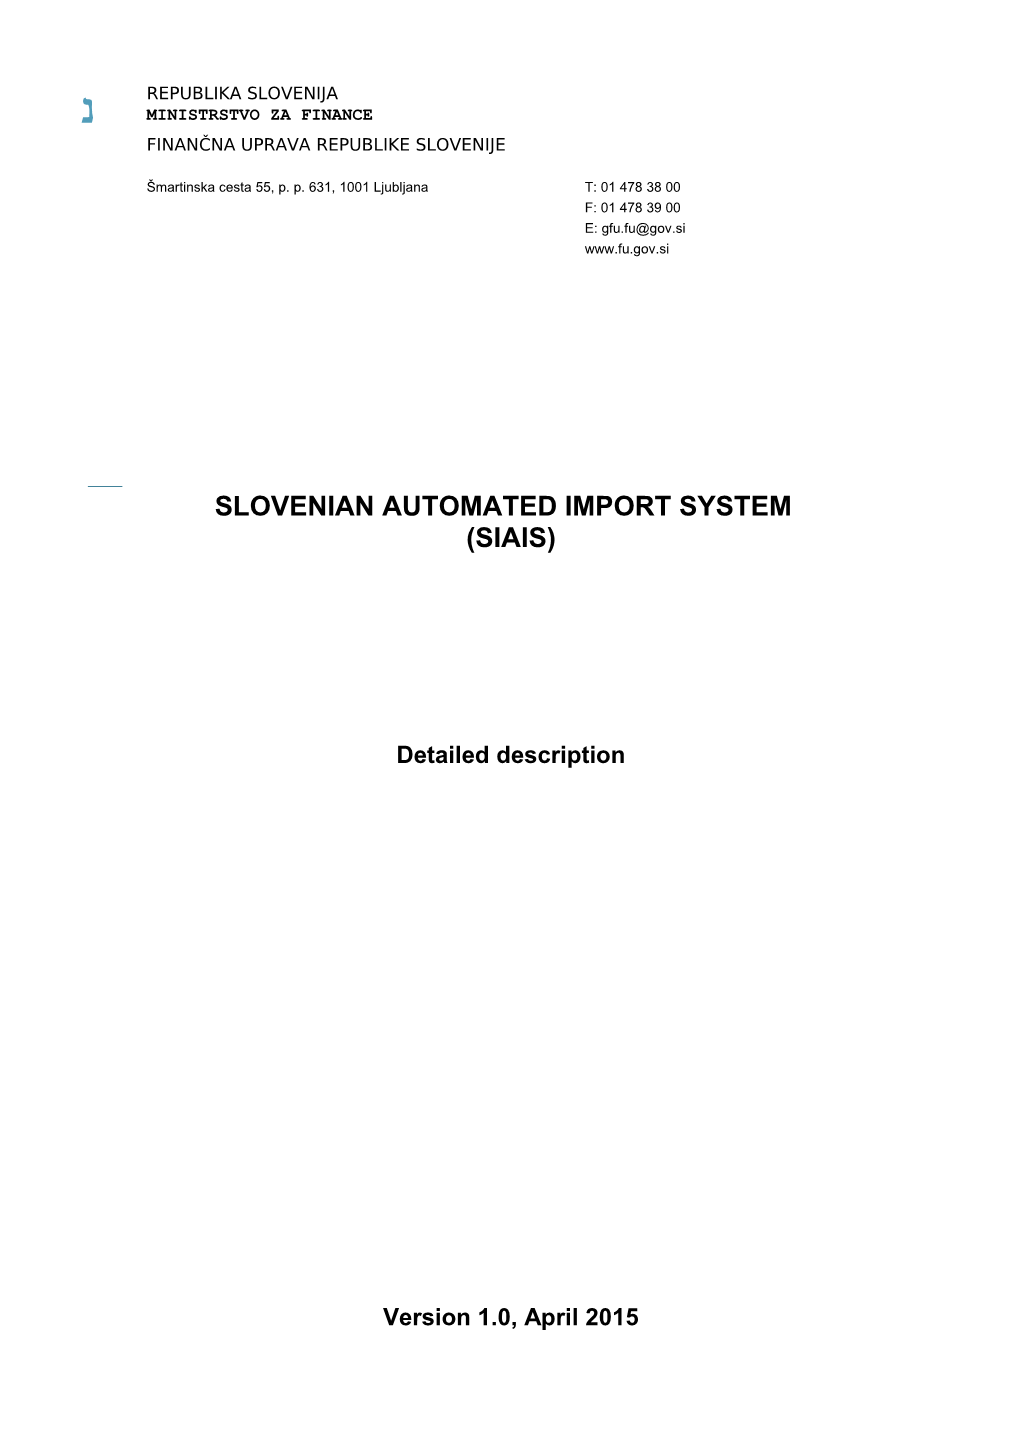 Slovenian Automated Import System